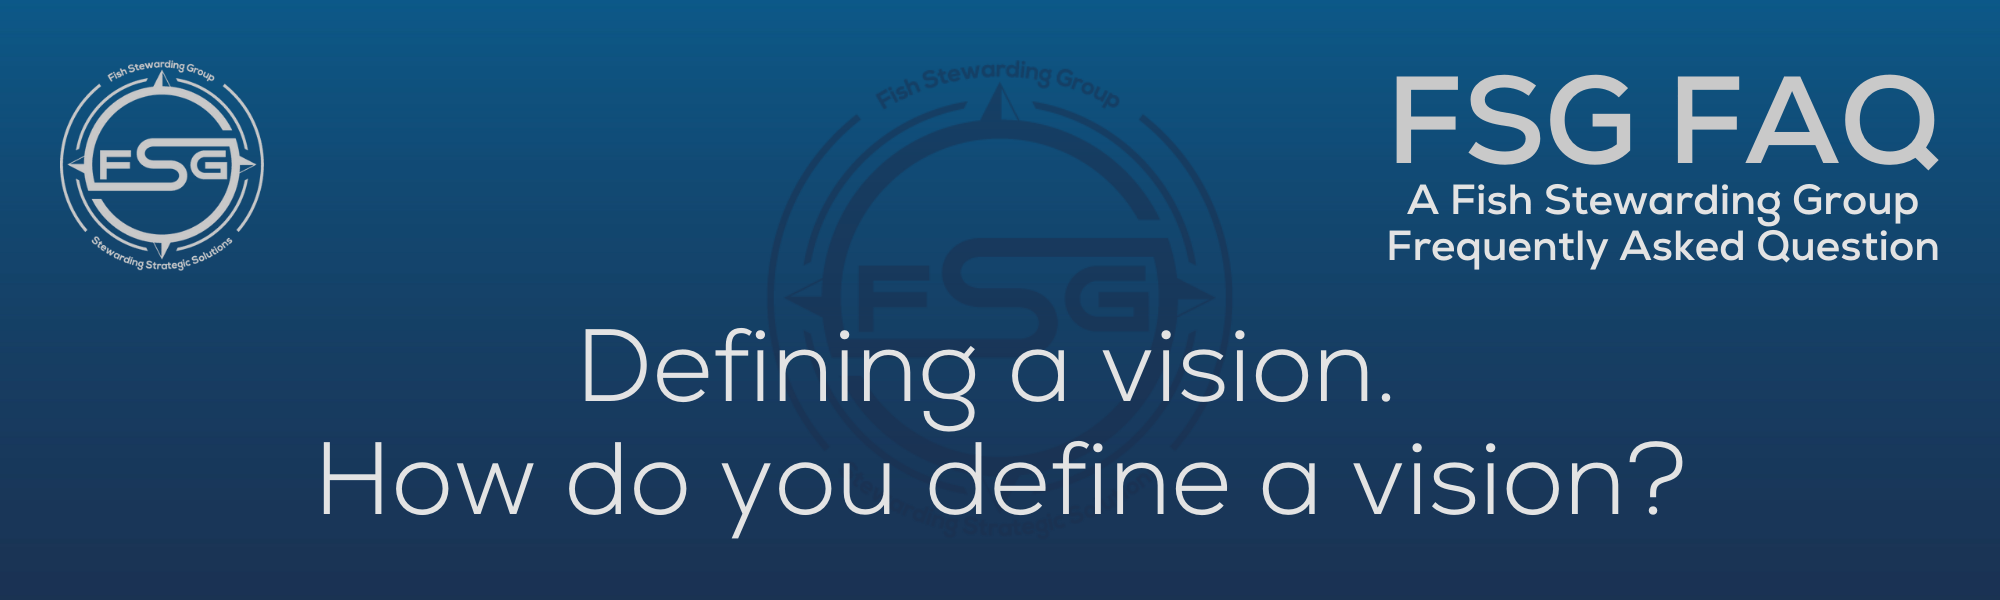 A rectangular and long thing Footer FAQ Image on the bottom of the Defining a vision? Page on the website. The background is a blue gradient color that goes from a dark blue on the bottom to a lighter blue on top. The text in lower center of the image in a light gray text that reads: Defining a vision? The text in gray in the upper right corner reads: FSG FAQ. Right beneath that is more gray text in a smaller font that reads: A Fish Stewarding Group Frequently Asked Question. On the upper left side is the FSG Logo in gray. The logo has the letters FSG in the middle with a circle with four pointed arrows facing north, south, east and west with the S connected to that circle. Four rounded lines make the next circle of the circle and the last layer is a thin circle with the text on the Bottom that reads Stewarding Strategist Solutions and on top, the text reads Fish Stewarding Group. And Lastly in the center background of the image is a watermarked FSG logo, faded in blue, in the background.